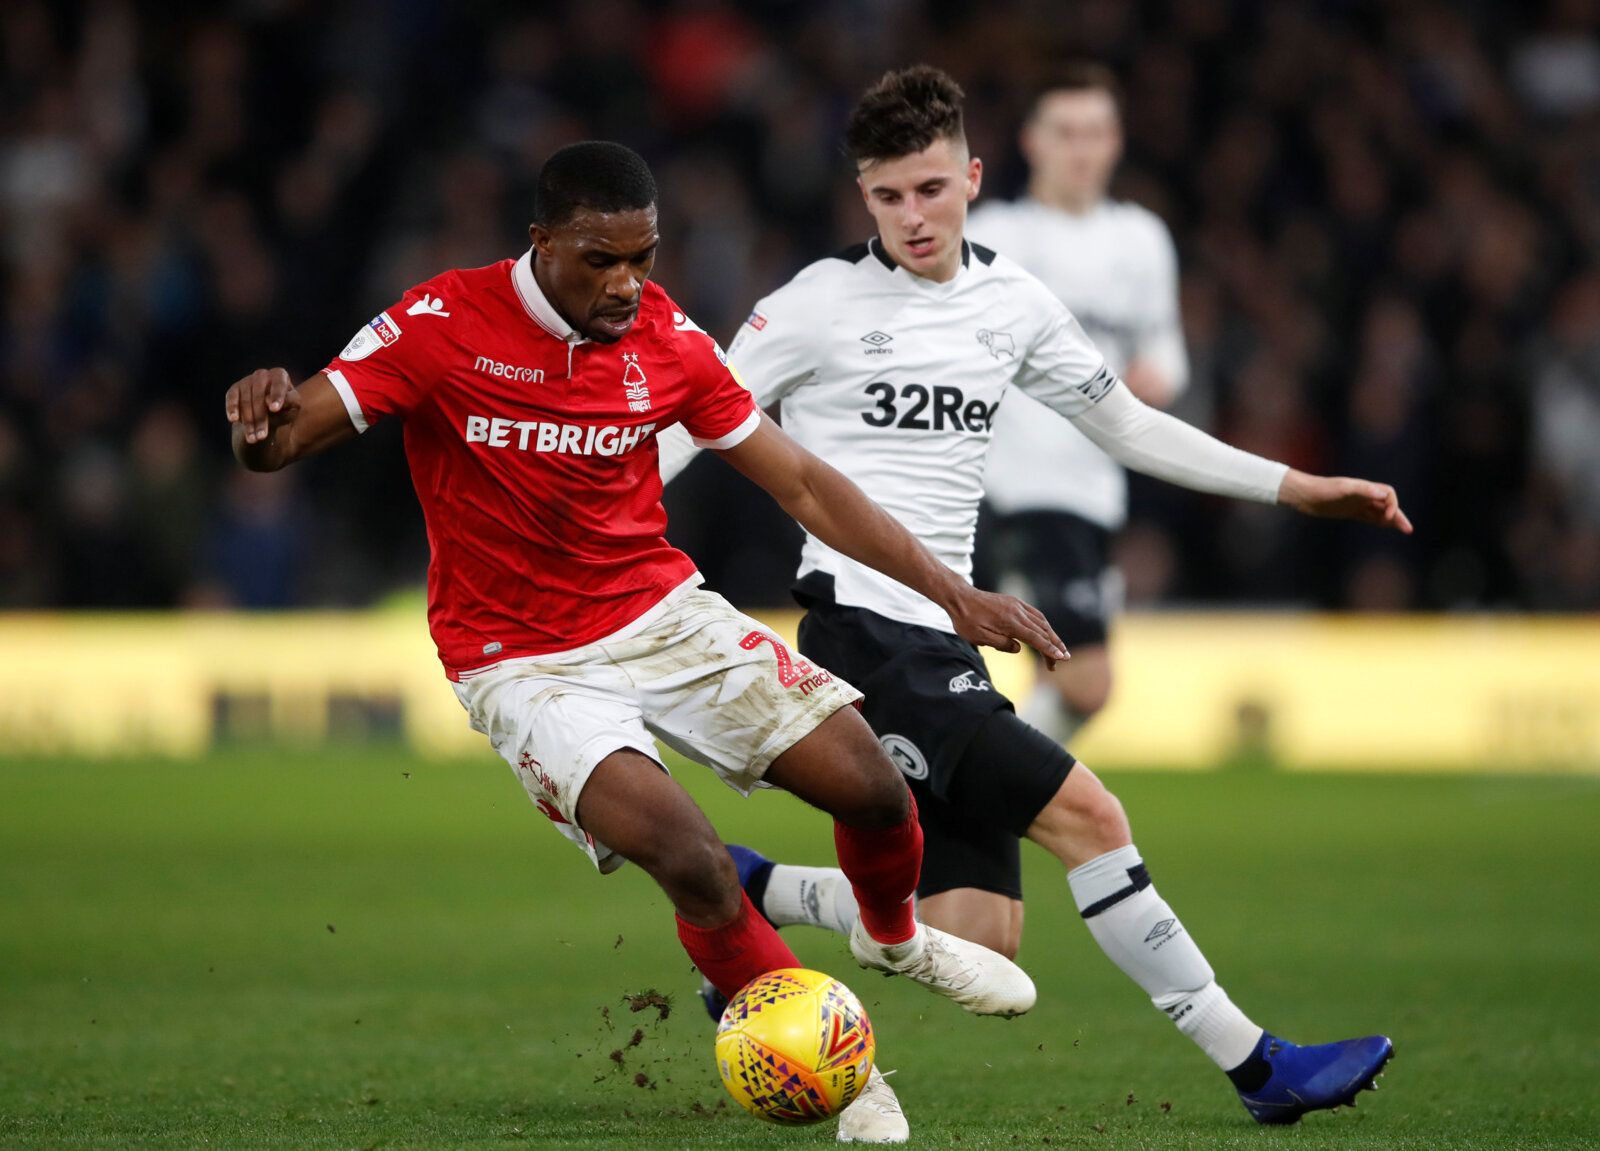 Soccer Football - Championship - Derby County v Nottingham Forest - Pride Park, Derby, Britain - December 17, 2018   Nottingham Forest's Tendayi Darikwa in action with Derby County's Mason Mount    Action Images/Carl Recine    EDITORIAL USE ONLY. No use with unauthorized audio, video, data, fixture lists, club/league logos or 